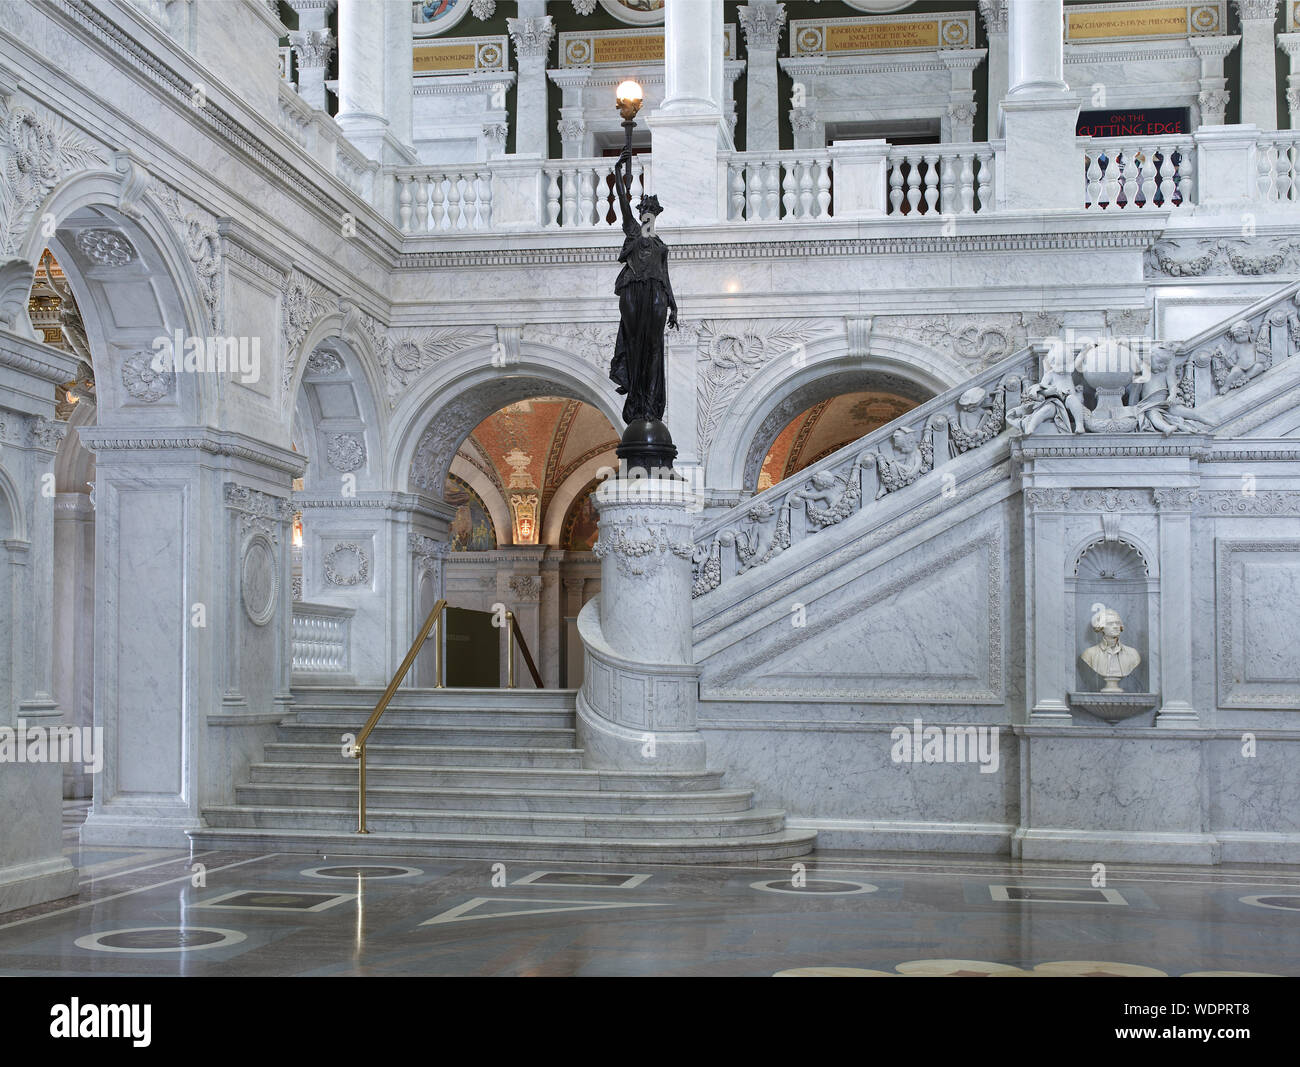 Great Hall. View of grand staircase and bronze statue of female figure on newel post holding a torch of electric light, with bust of Thomas Jefferson at right. Library of Congress Thomas Jefferson Building, Washington, D.C. Stock Photo